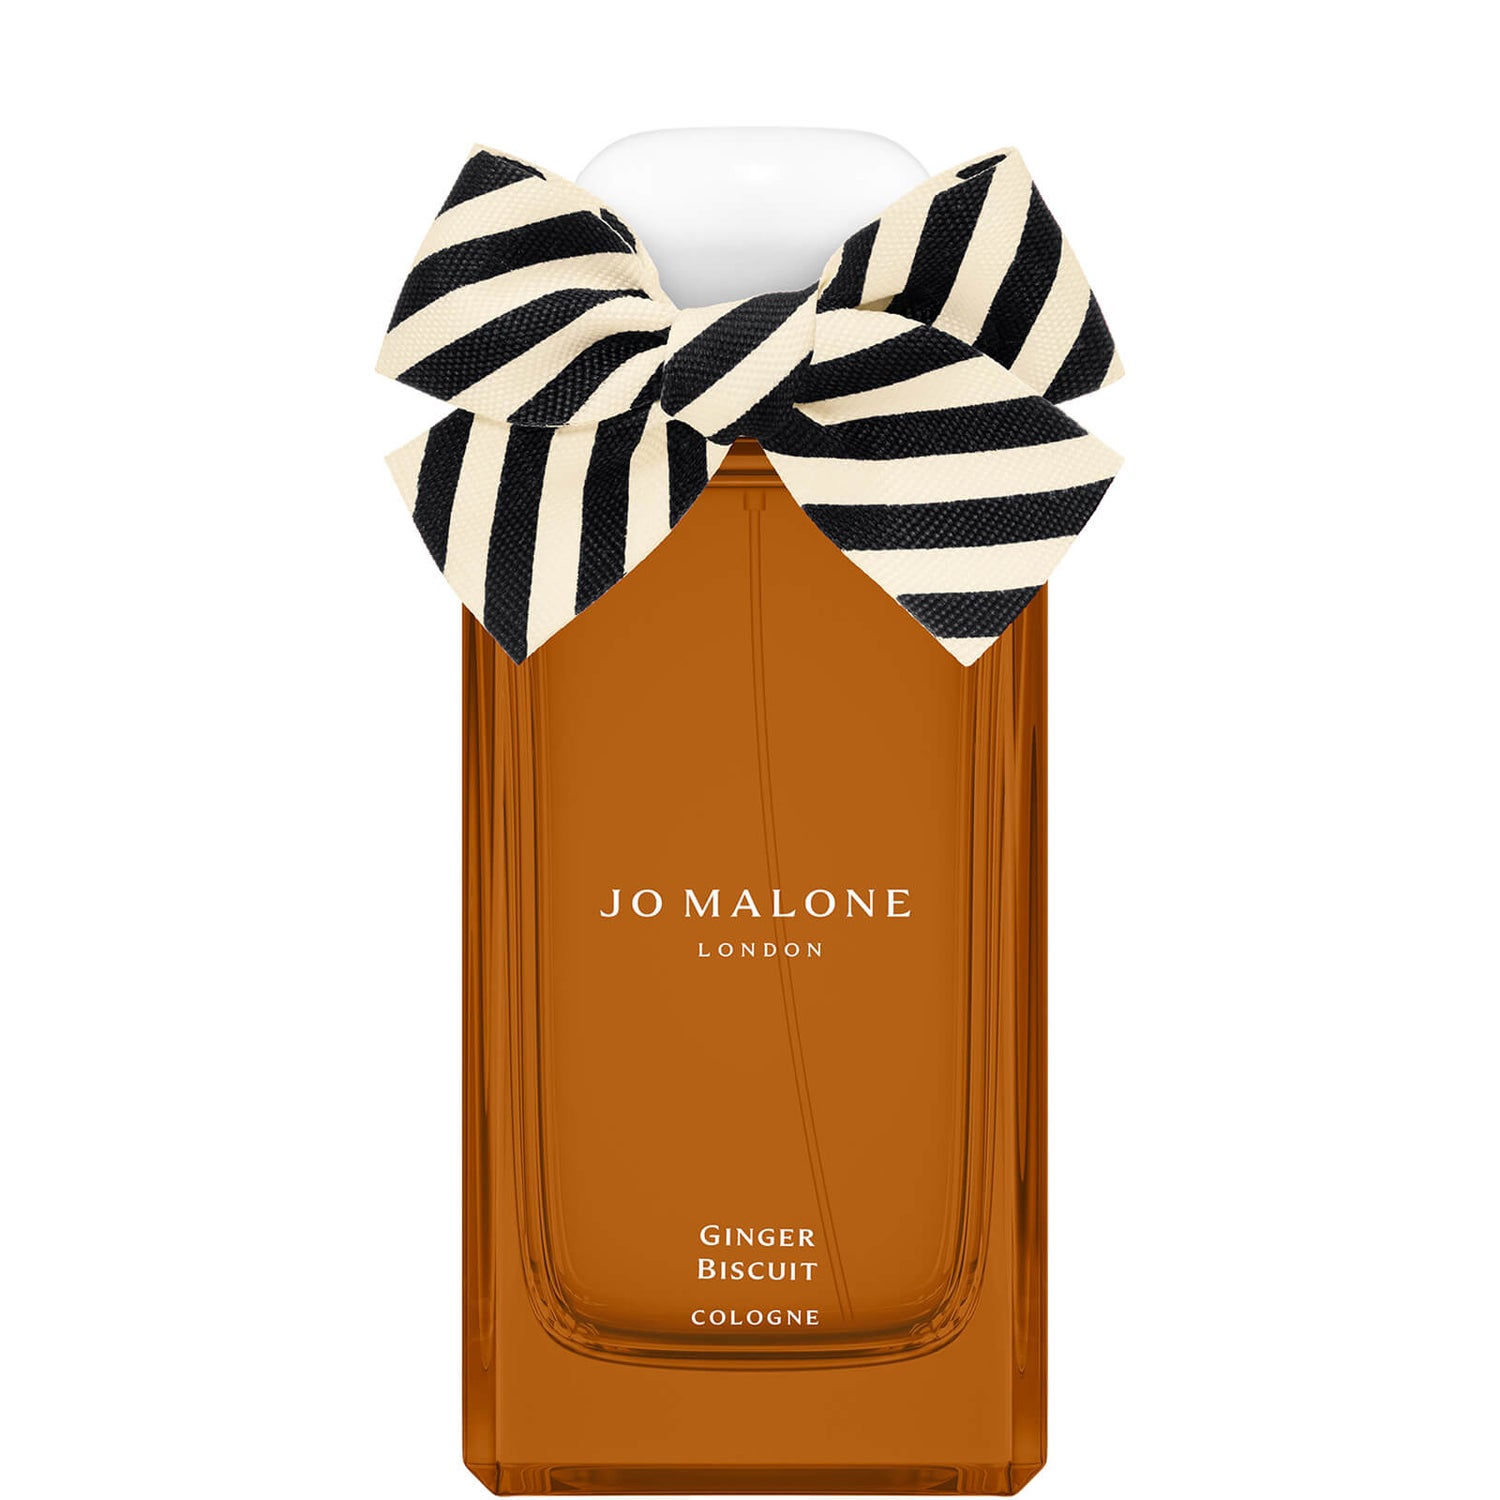 Jo Malone London Ginger Biscuit Cologne 100ml